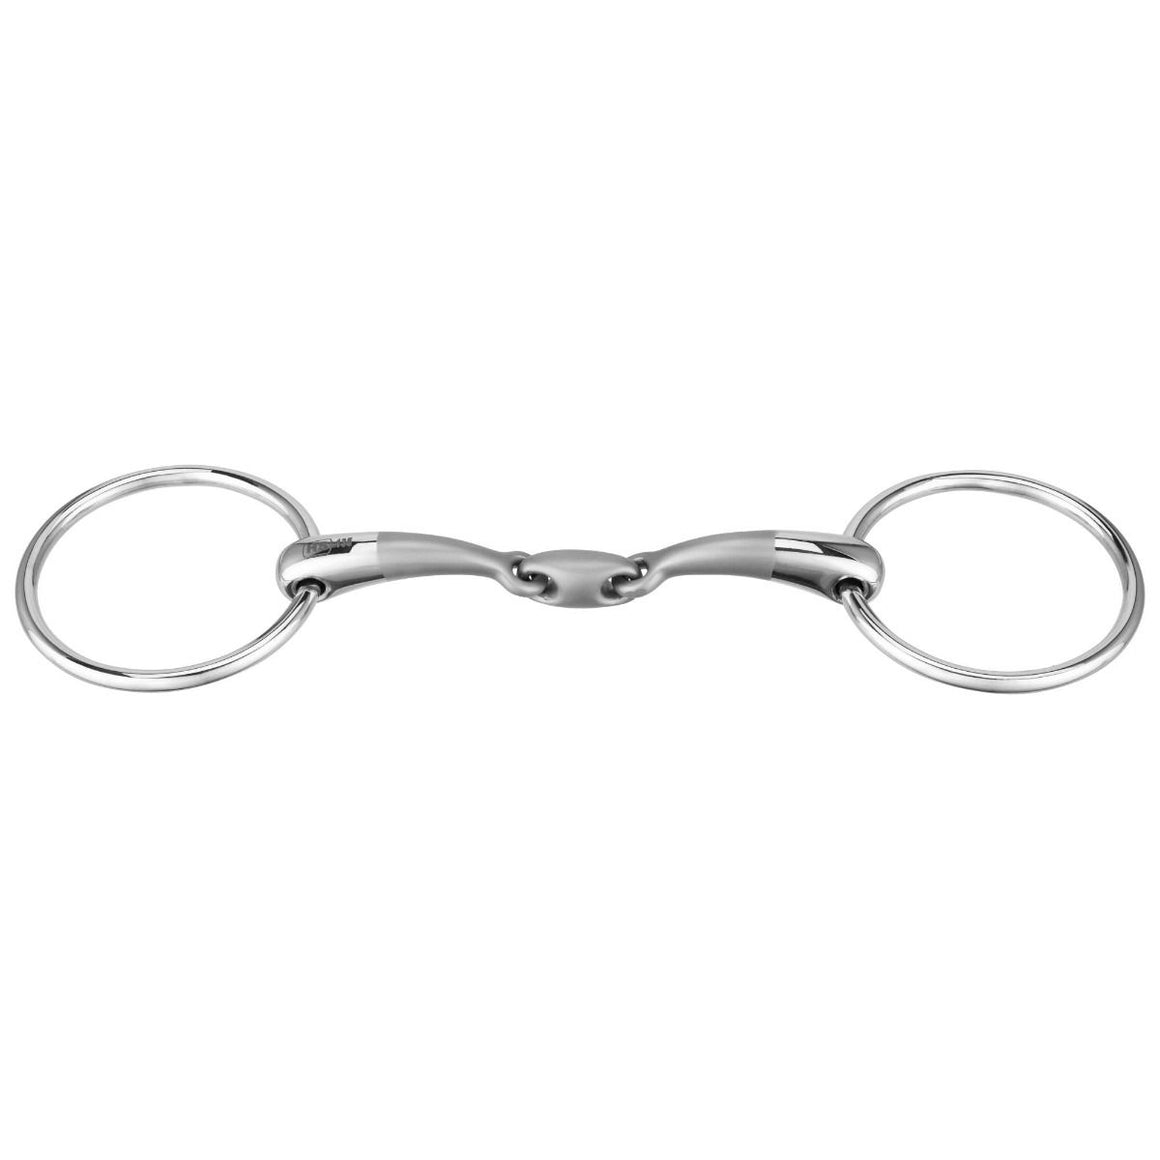 Sprenger SATINOX Loose Ring Snaffle Double Joint 14mm 40464